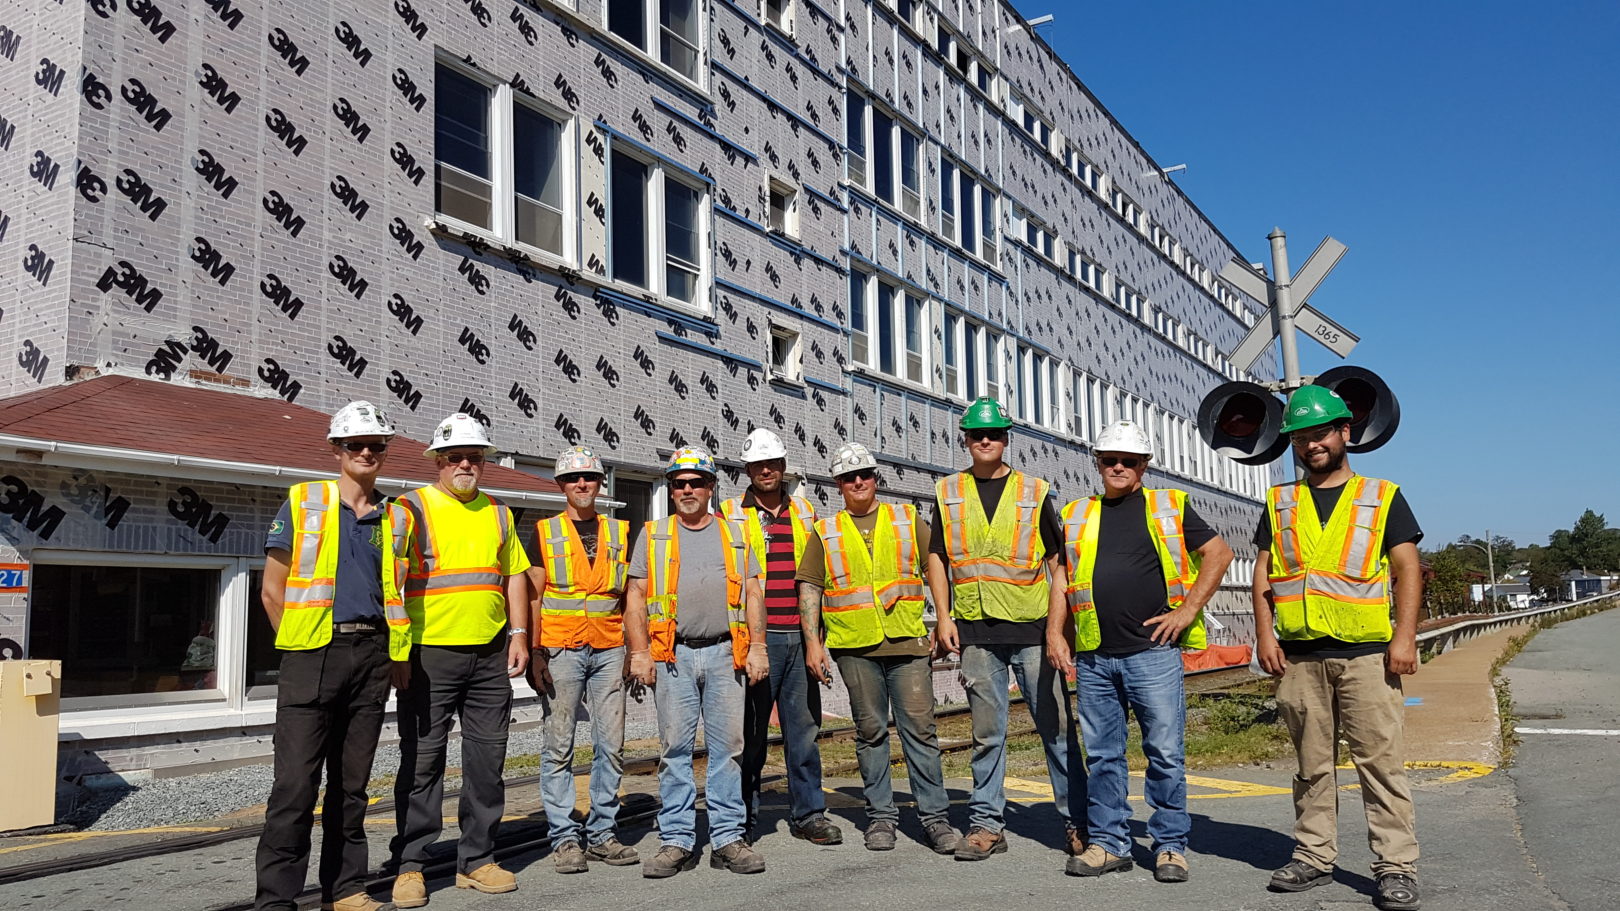 Flynn crew group photo in front of a new build project